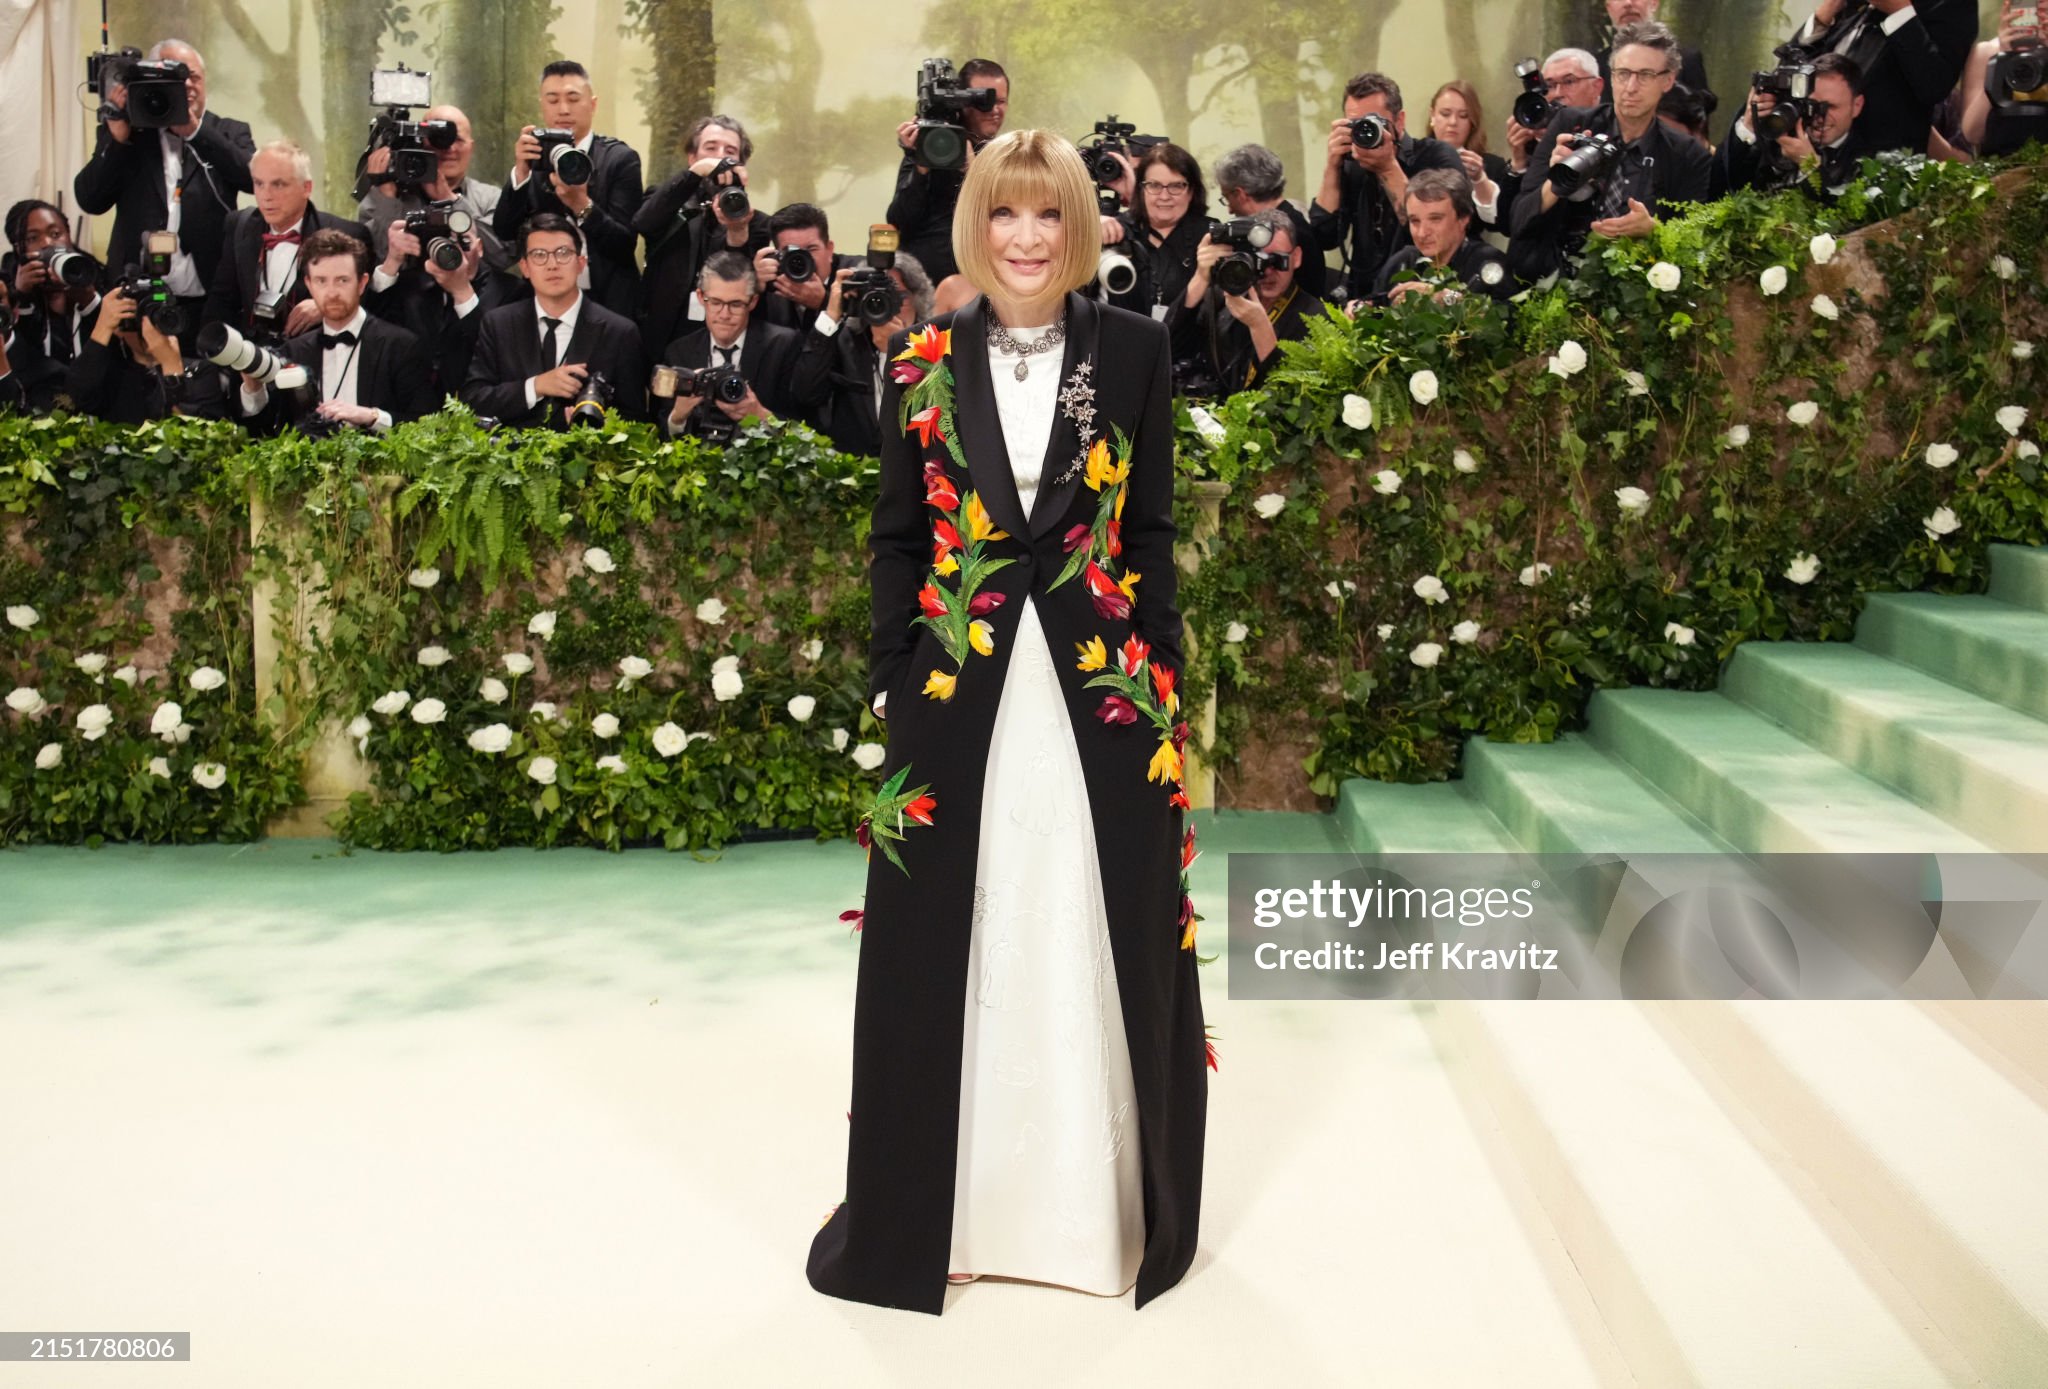 The Met Gala: Beacon of influencer culture – or a load of balls?